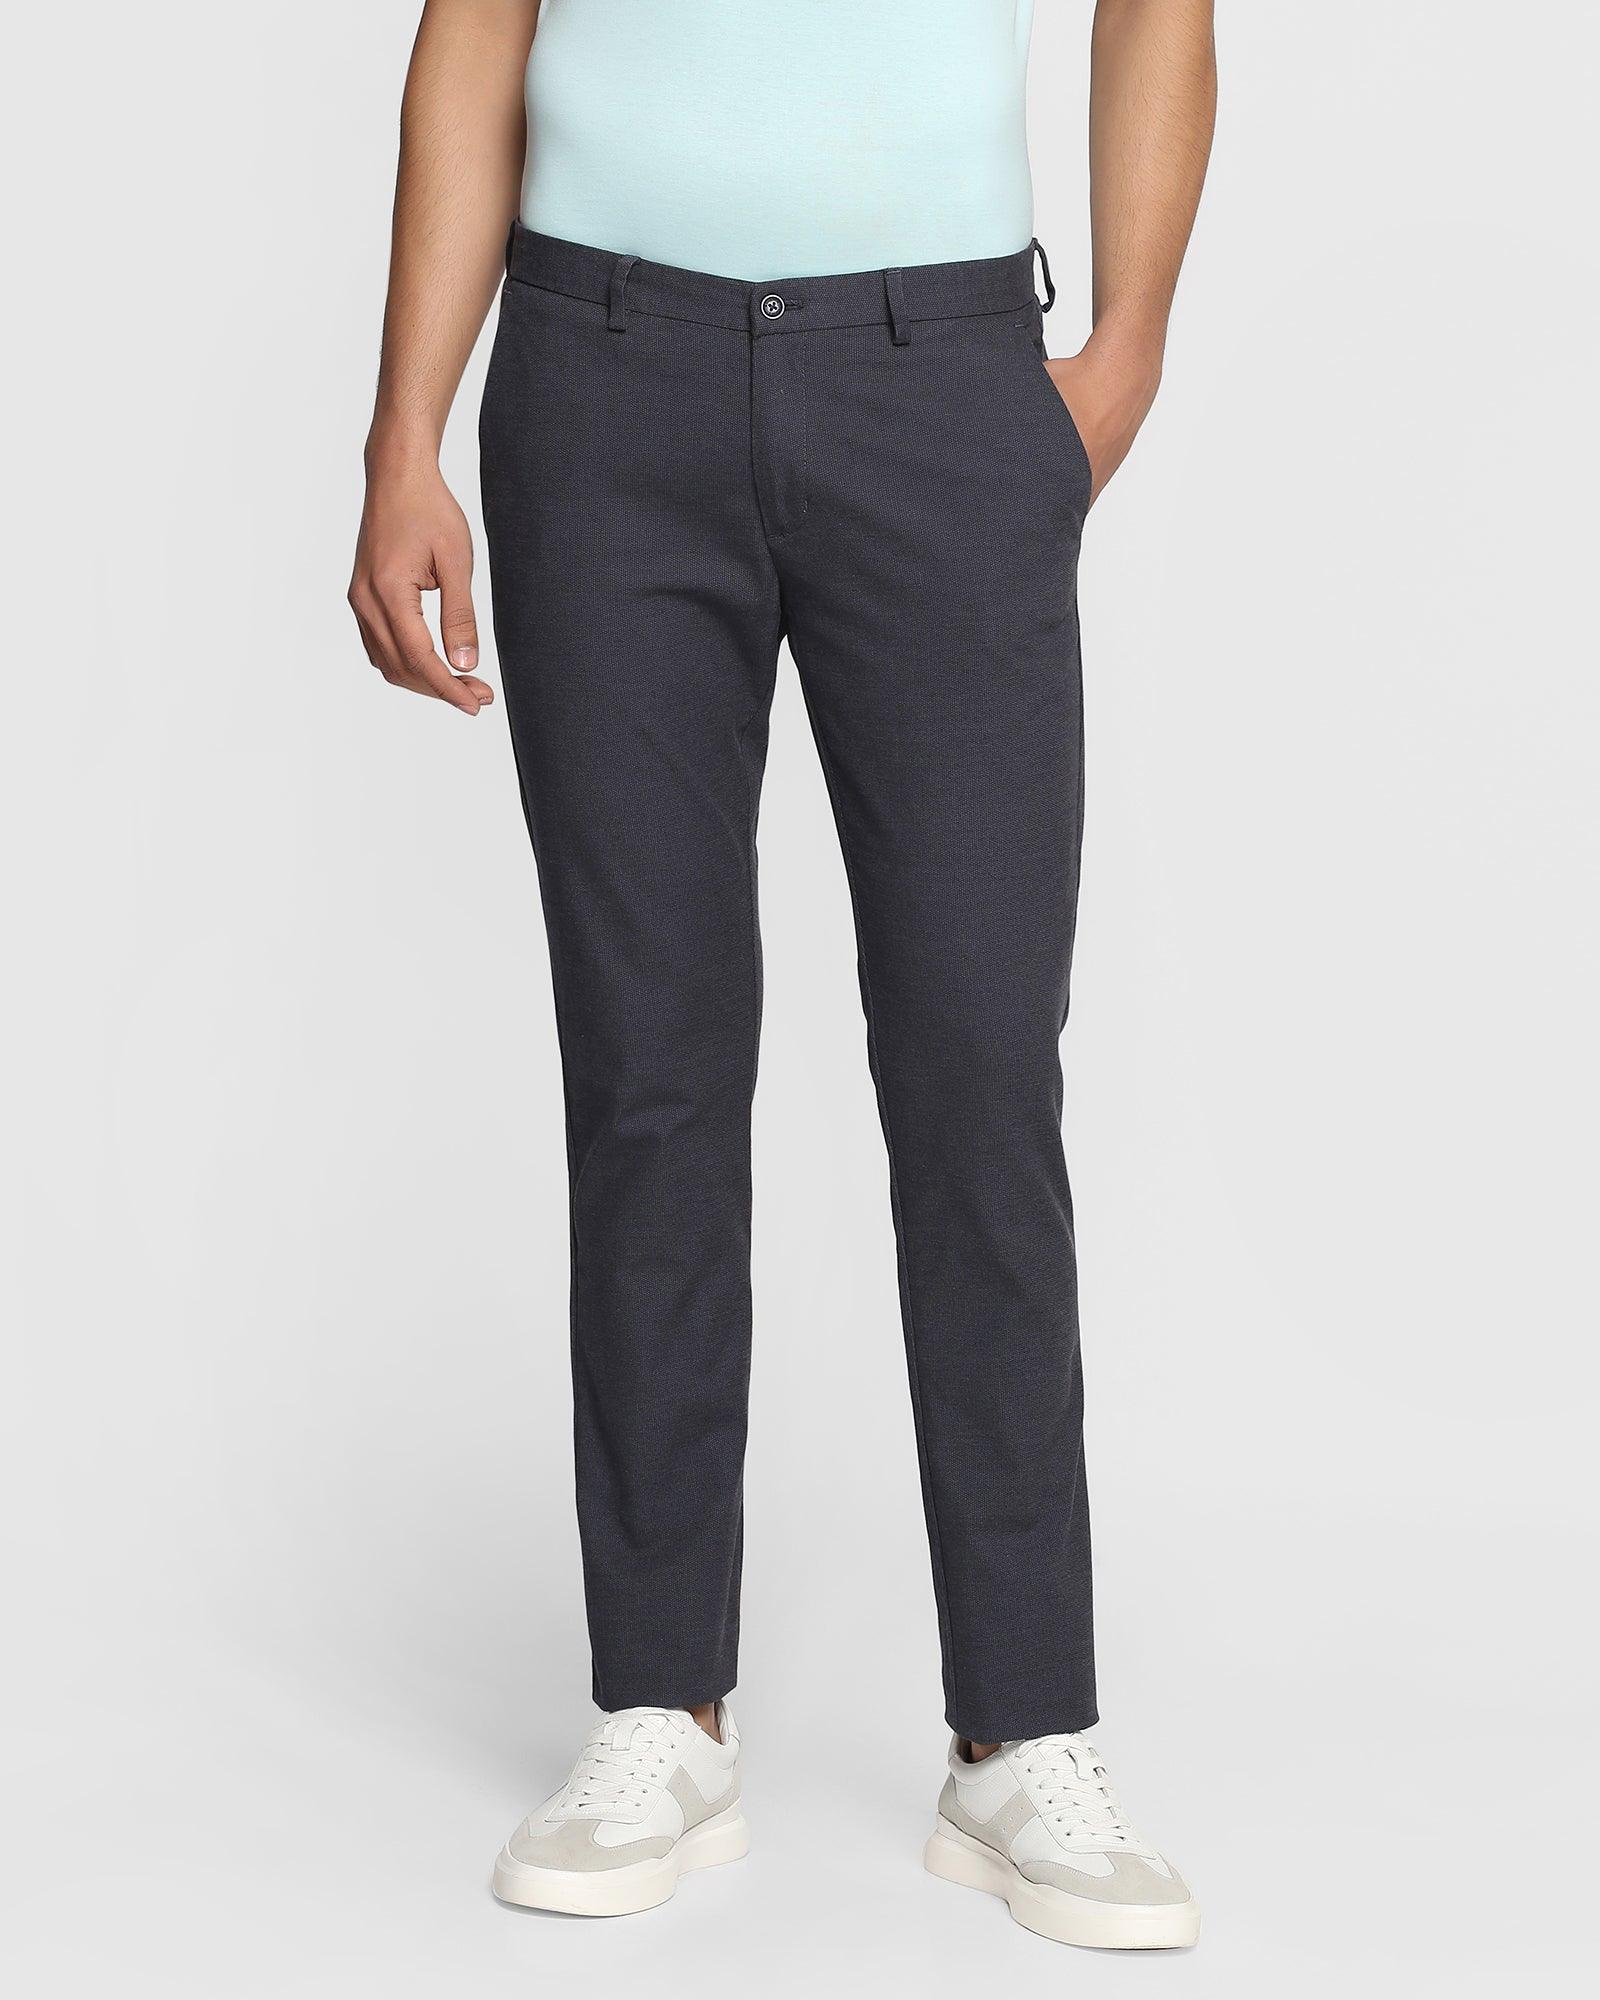 Slim Fit B-91 Casual Navy Solid Khakis - Jean